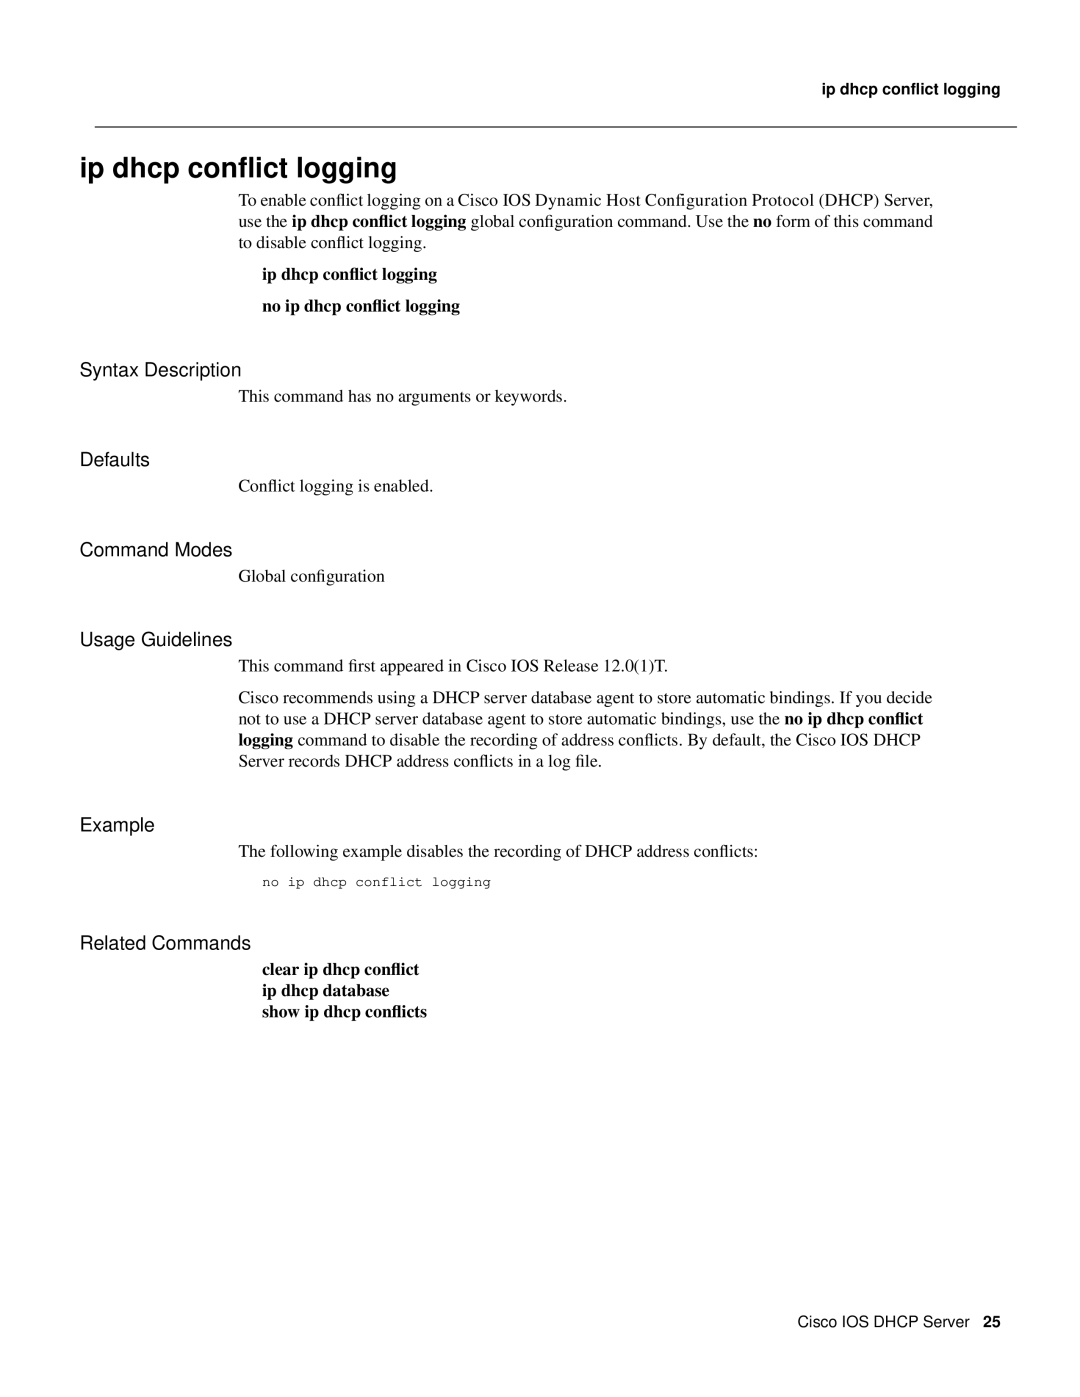 Cisco Systems 32369 manual Example, ip dhcp conﬂict logging no ip dhcp conﬂict logging, Syntax Description, Defaults 